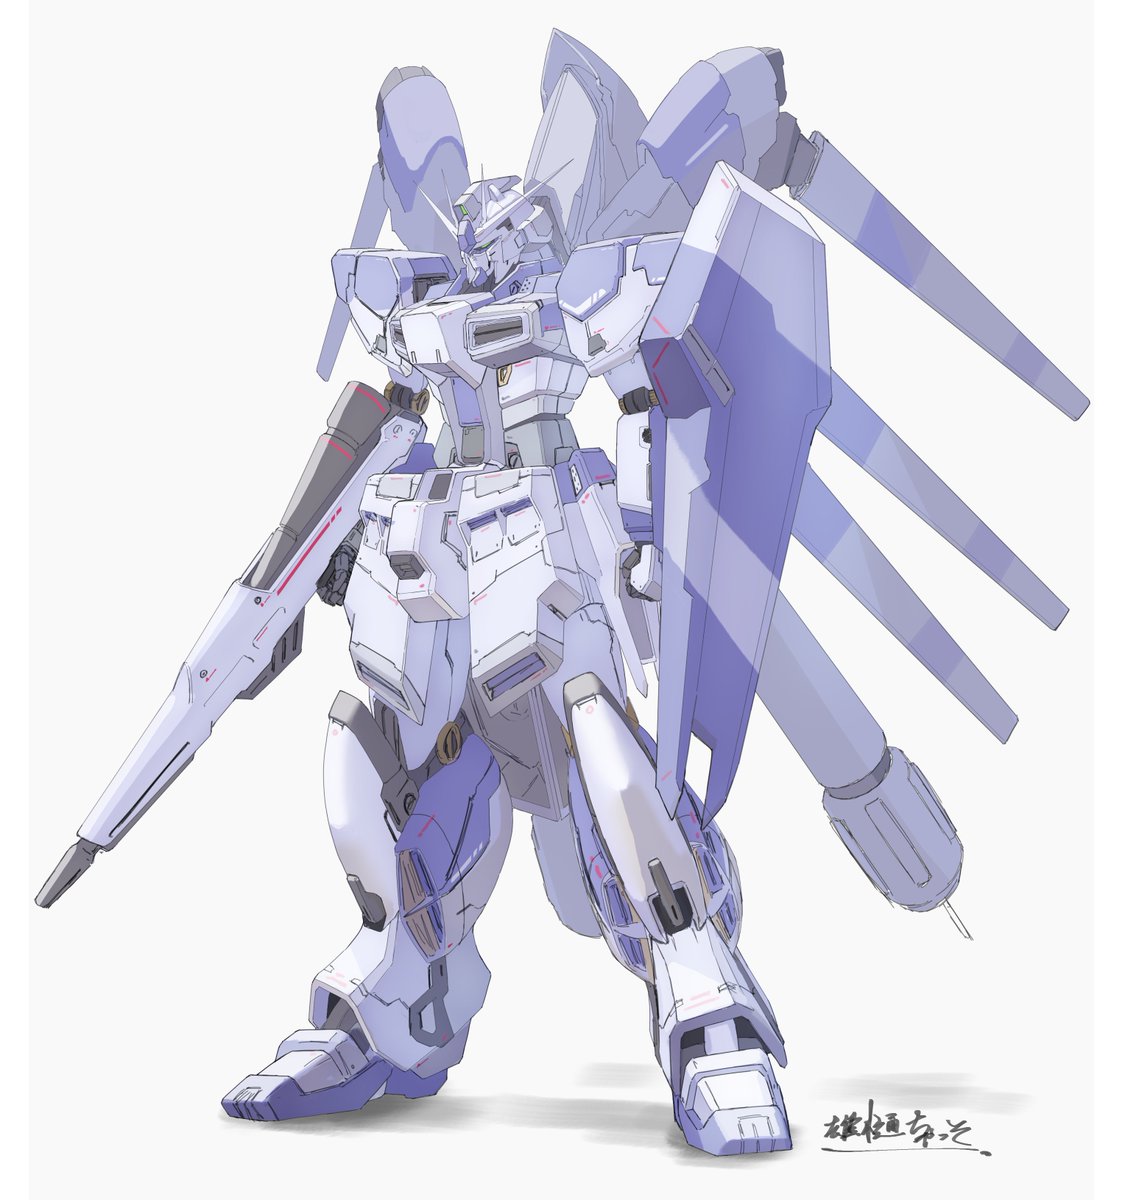 solo white background holding standing weapon holding weapon gun  illustration images